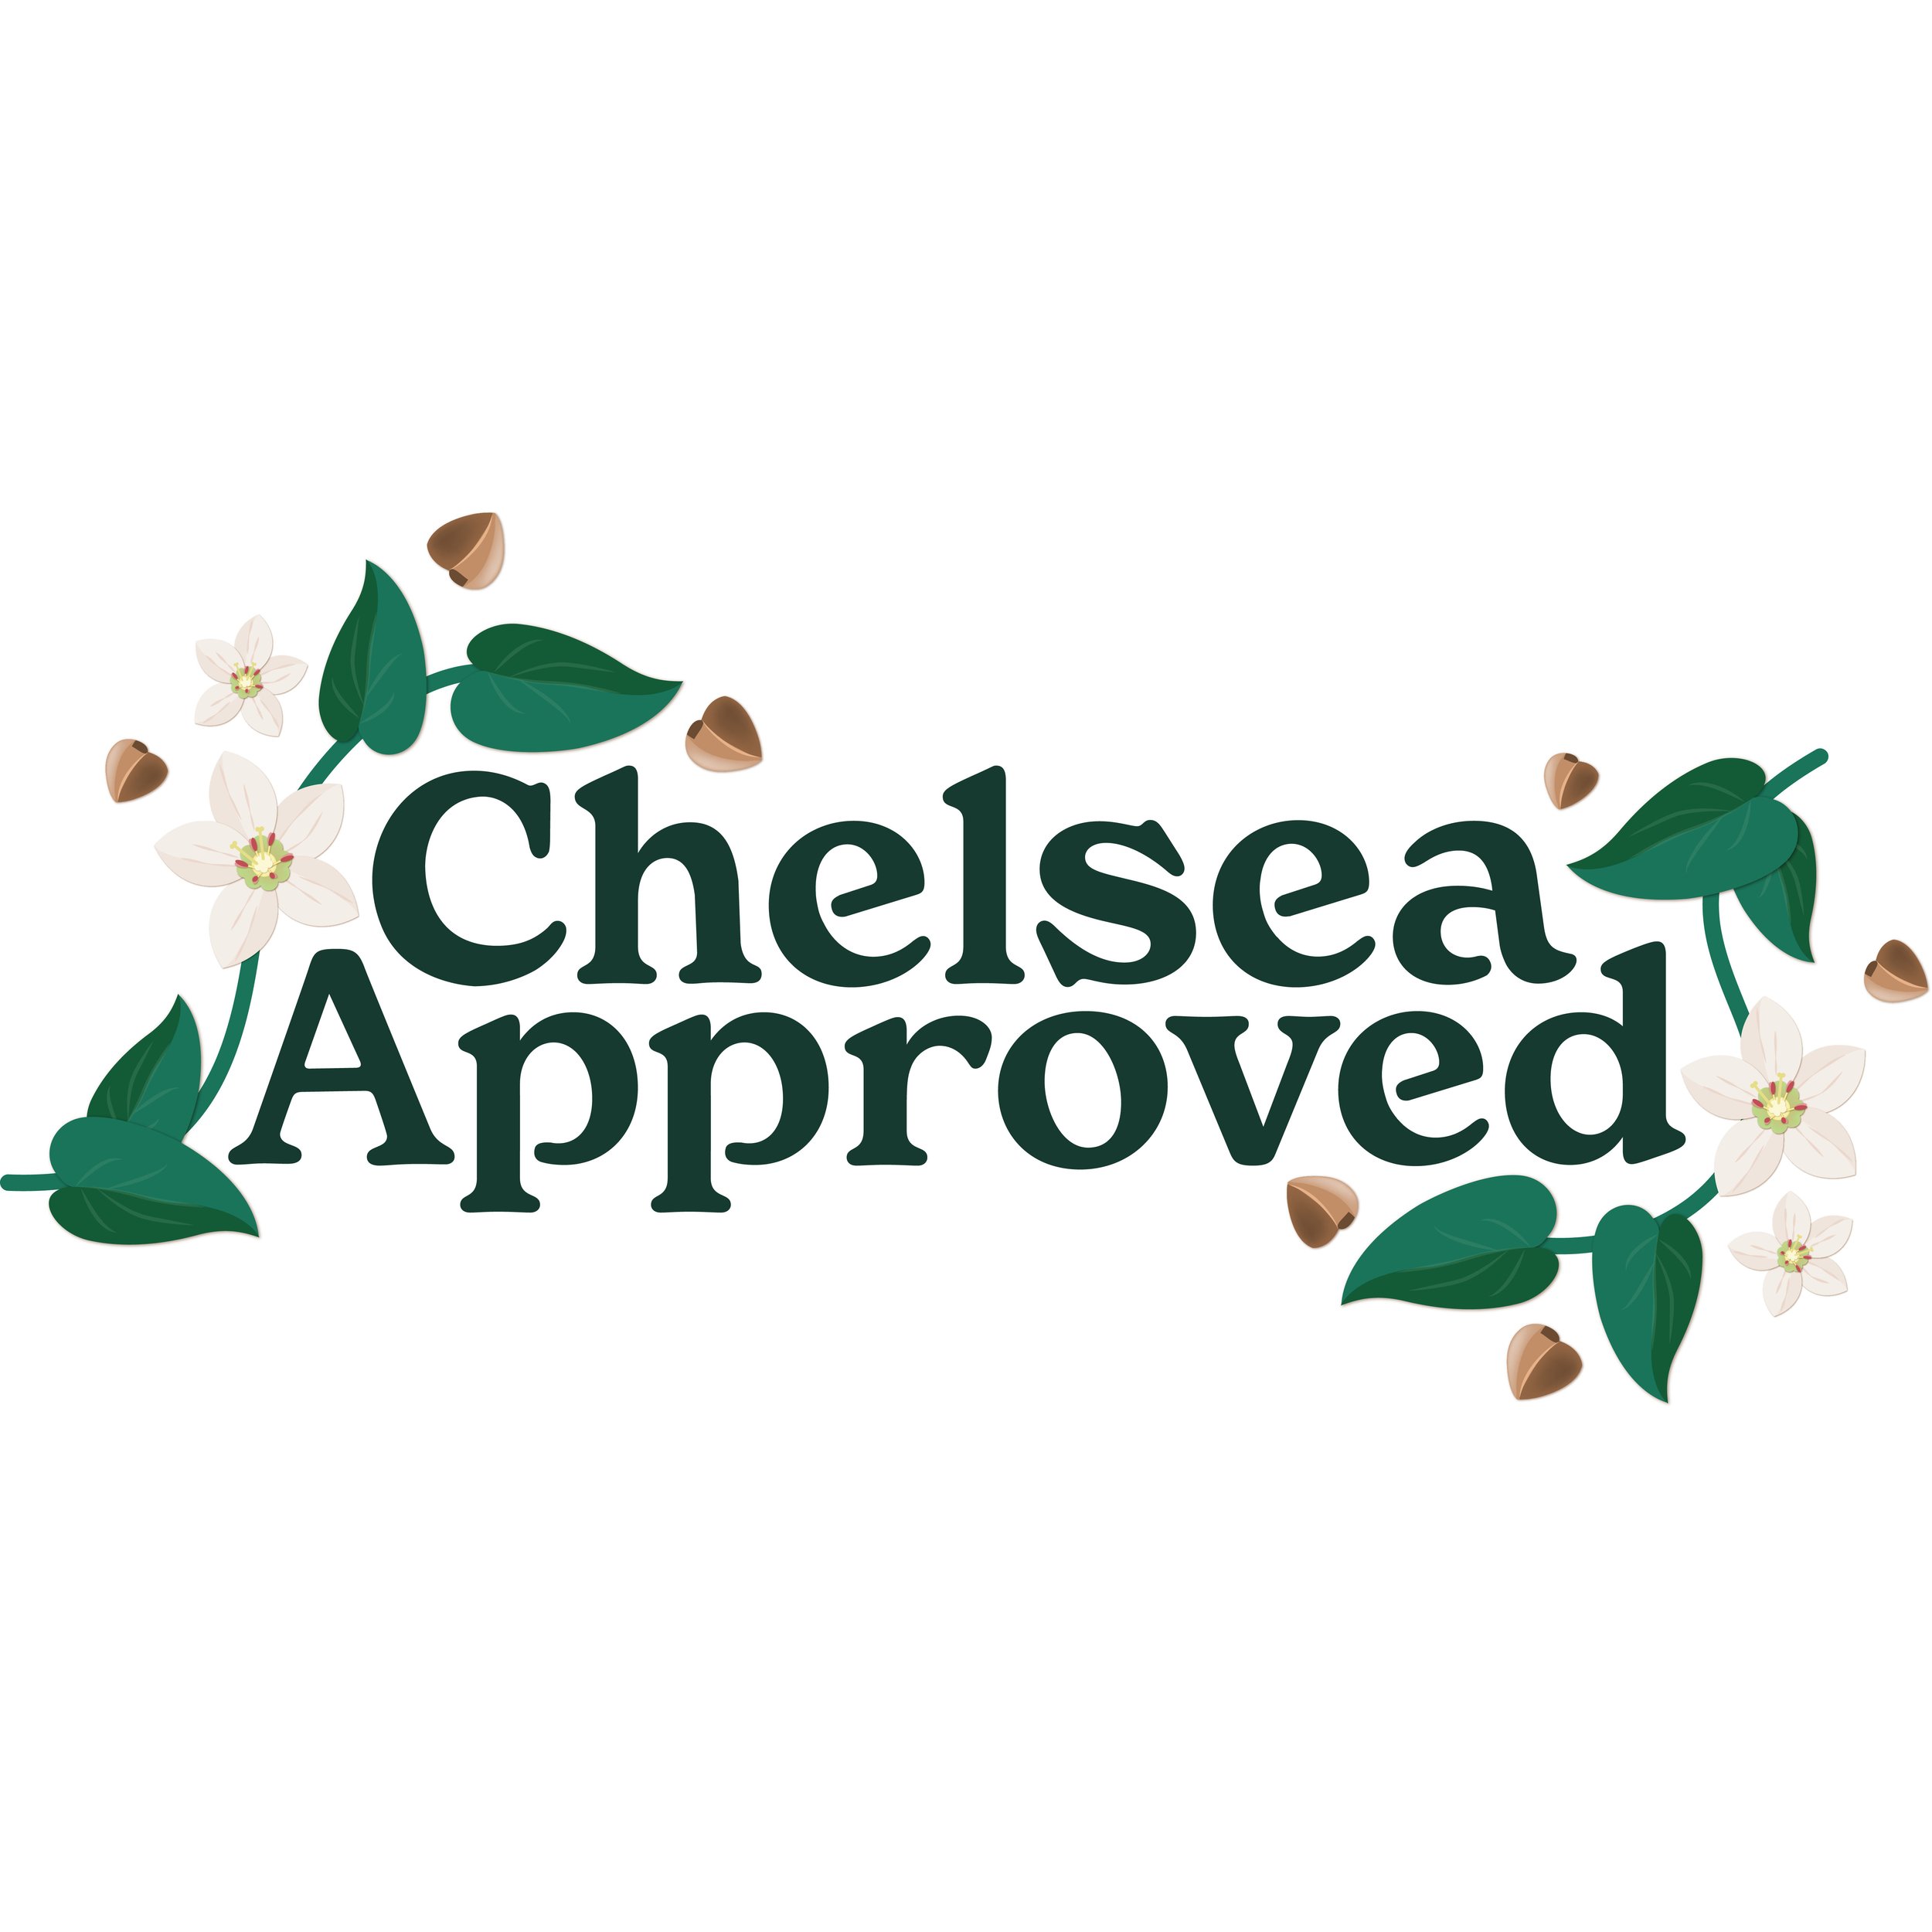 SQUARE - Chelsea Approved_Primary logo_FULL COLOR.jpeg